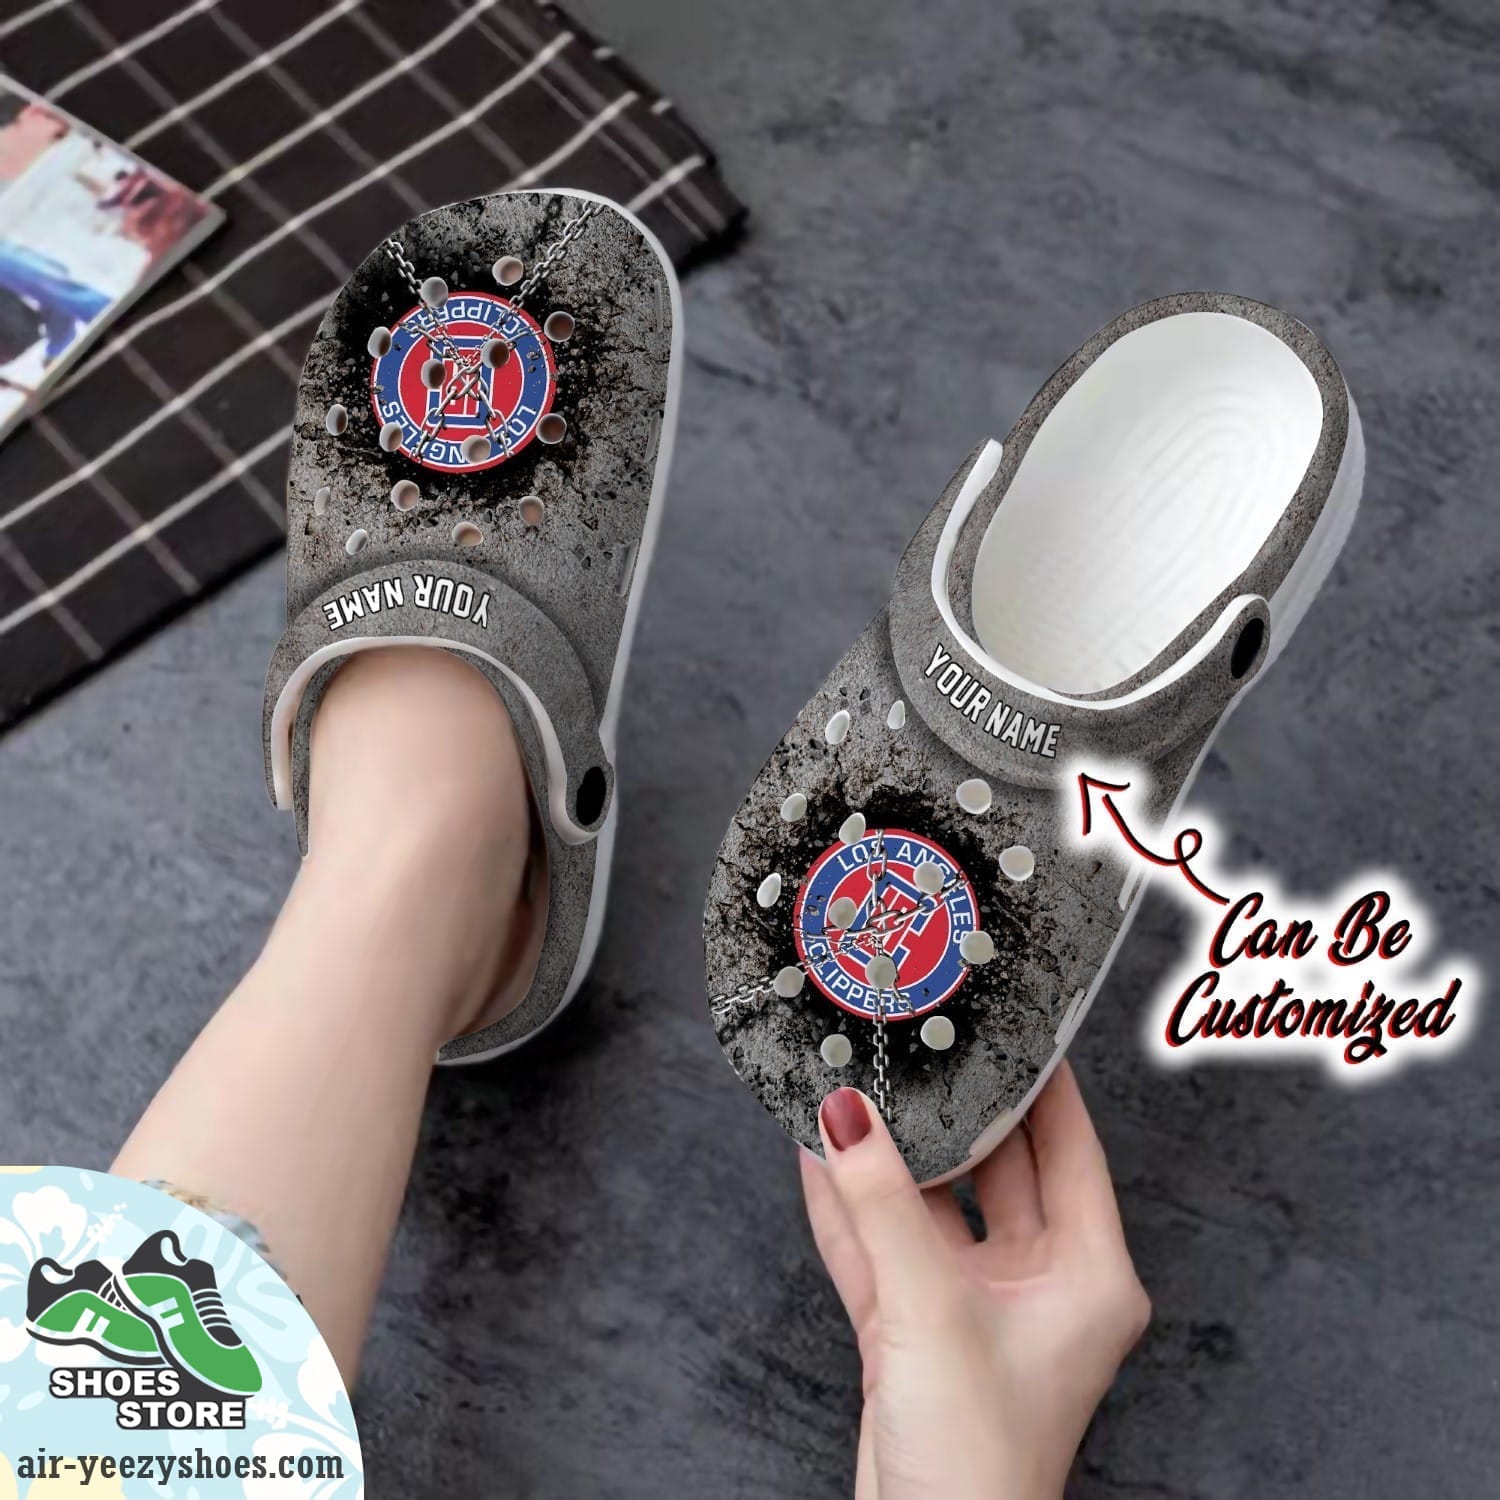 Los Angeles Clippers Personalized Chain Breaking Wall Clog Shoes, Basketball Crocs